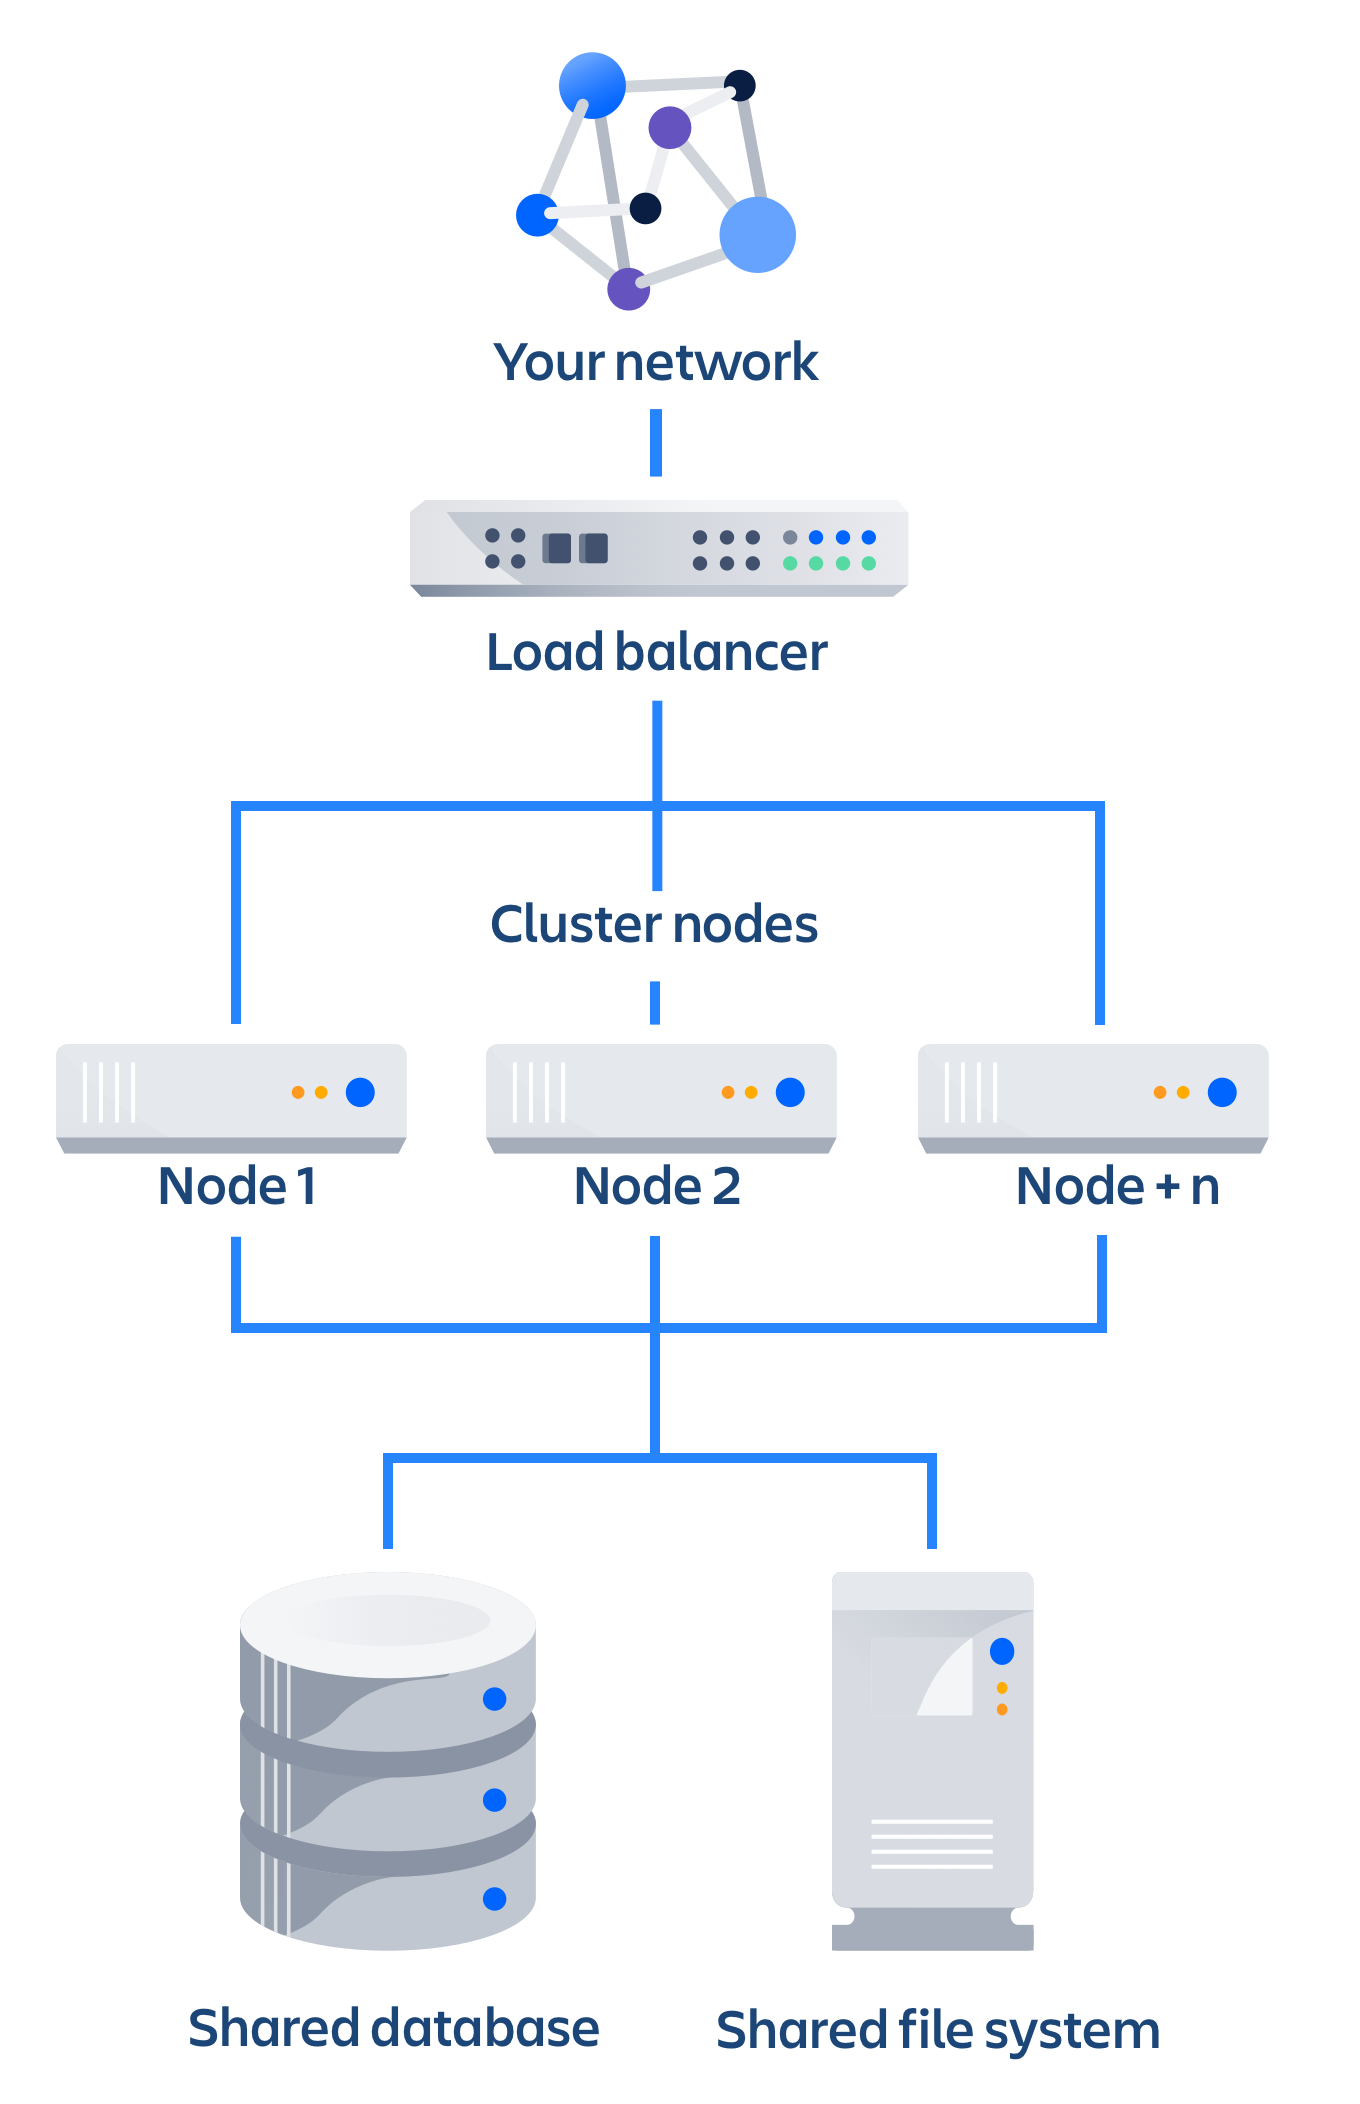 Atlassian Data Center architectural diagram in promotion of Vivid Trace being qualified for Data Center